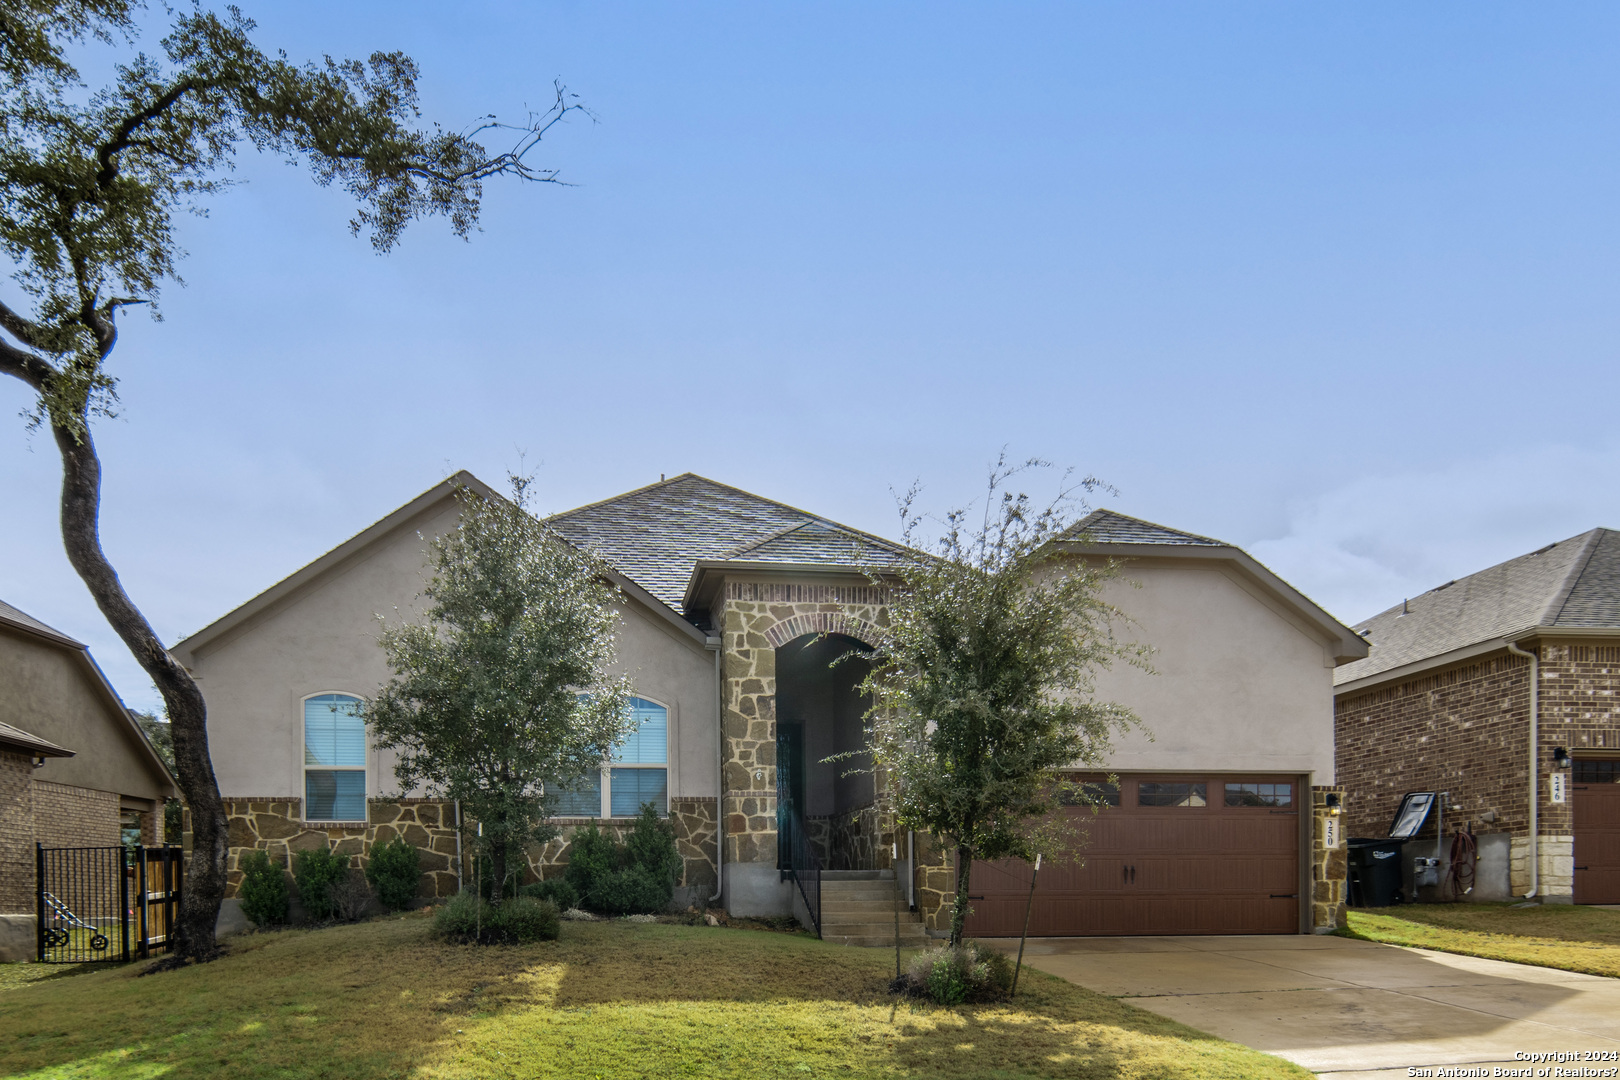 Photo of 250 Sigel Ave in New Braunfels, TX